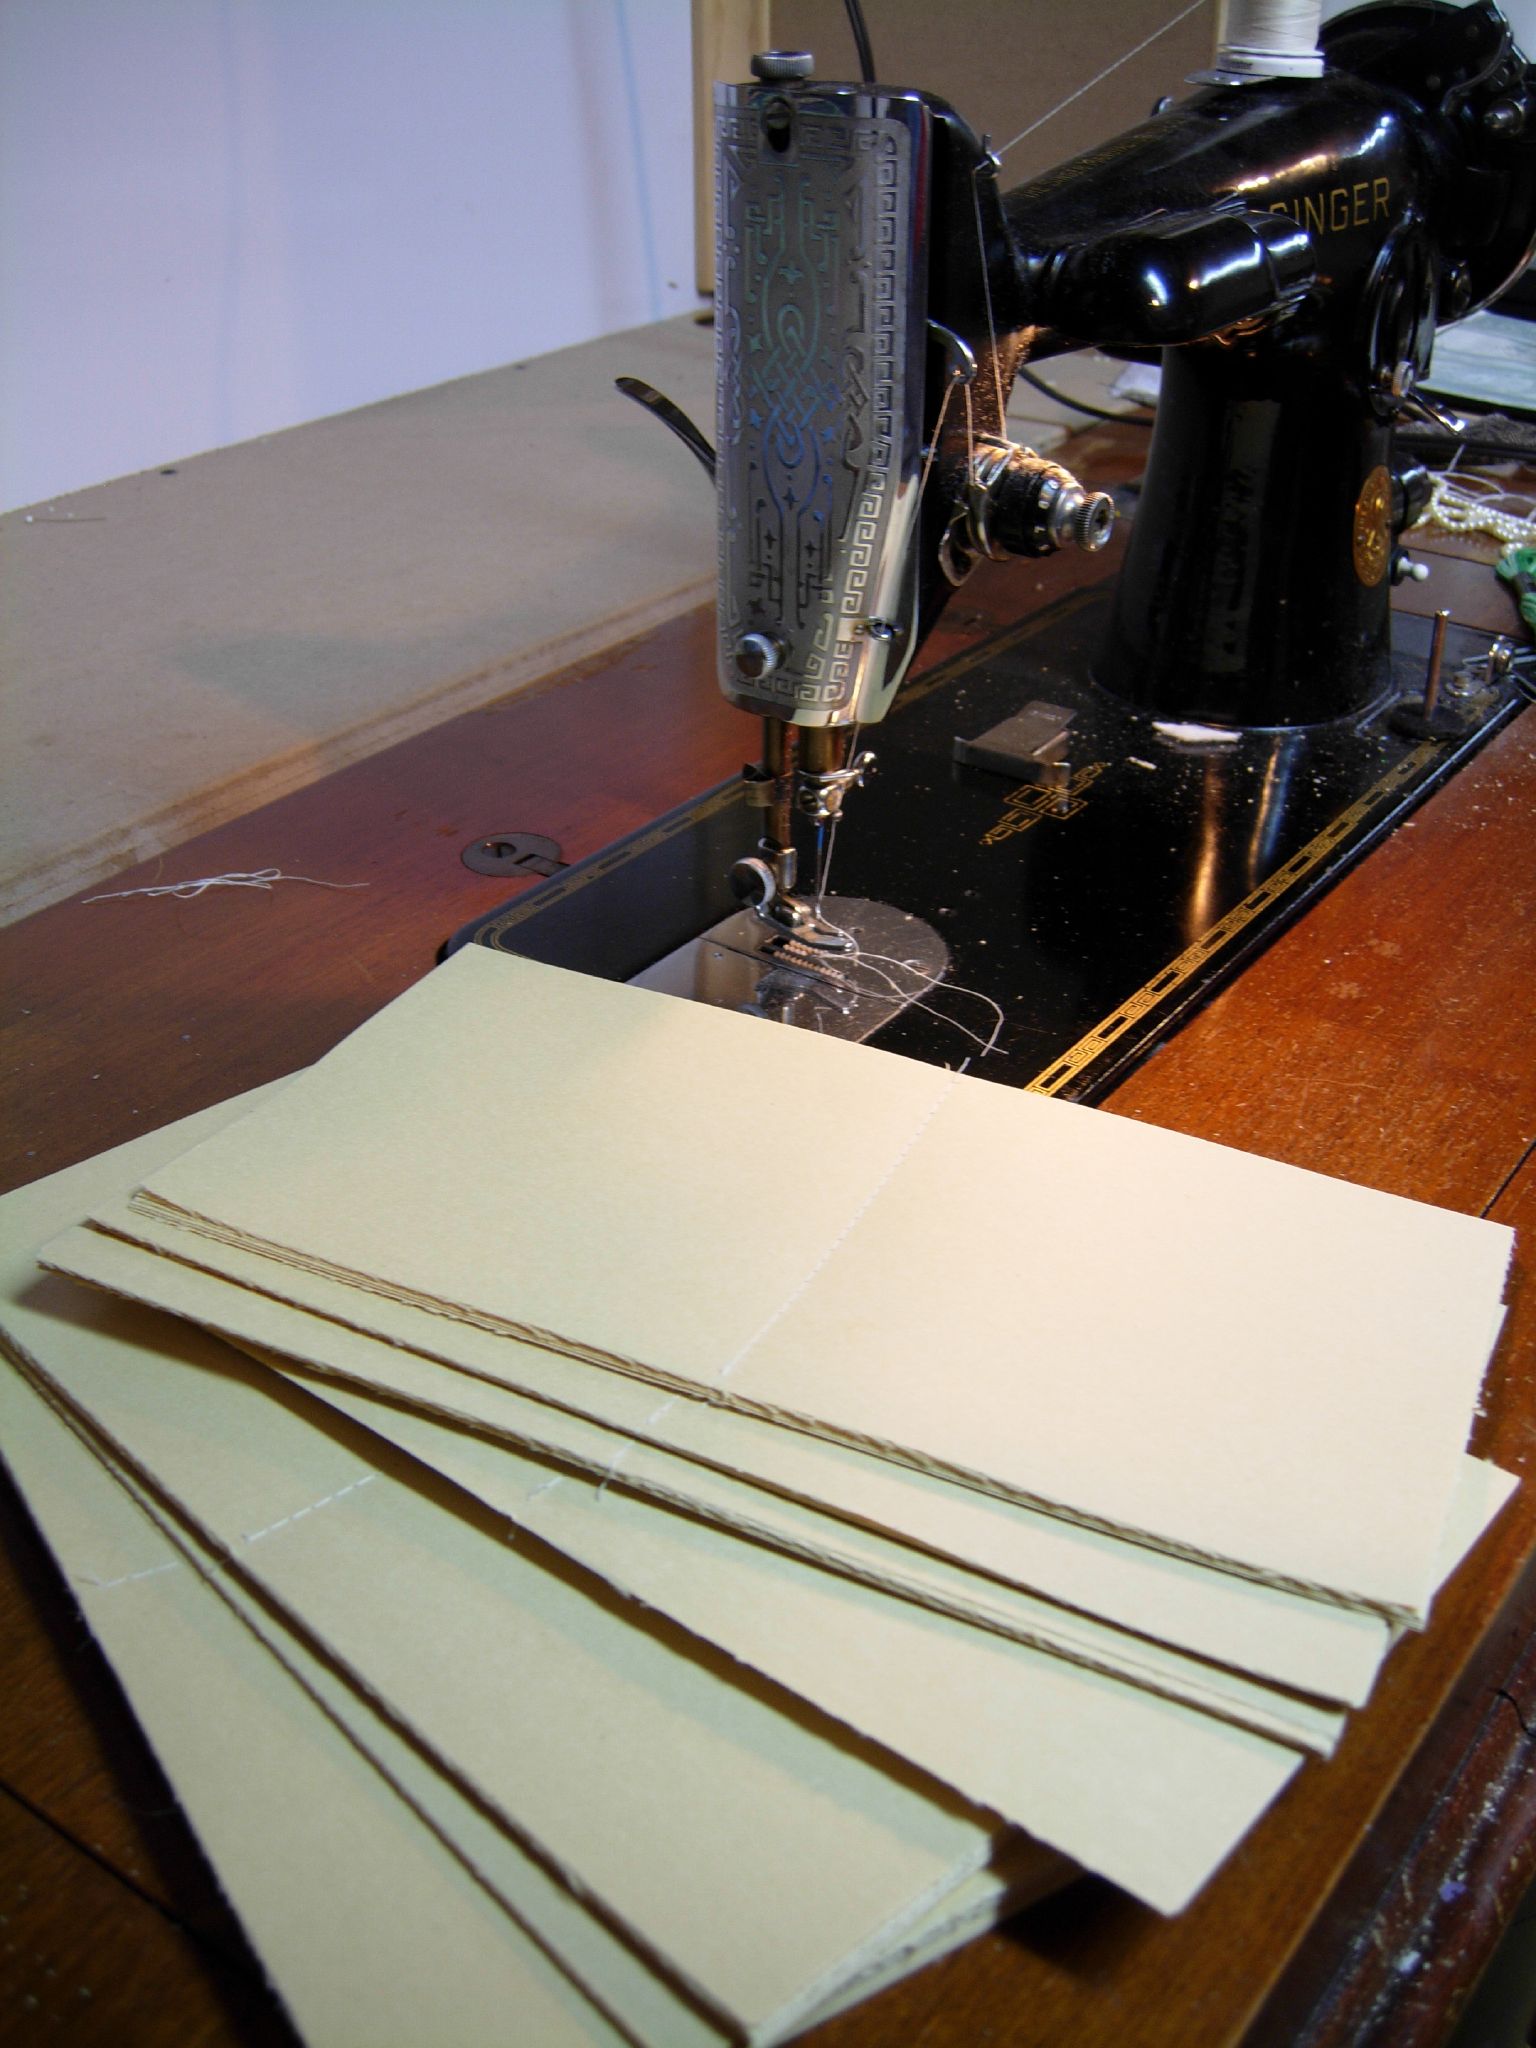 four sheets of parchment are sitting on a sewing machine